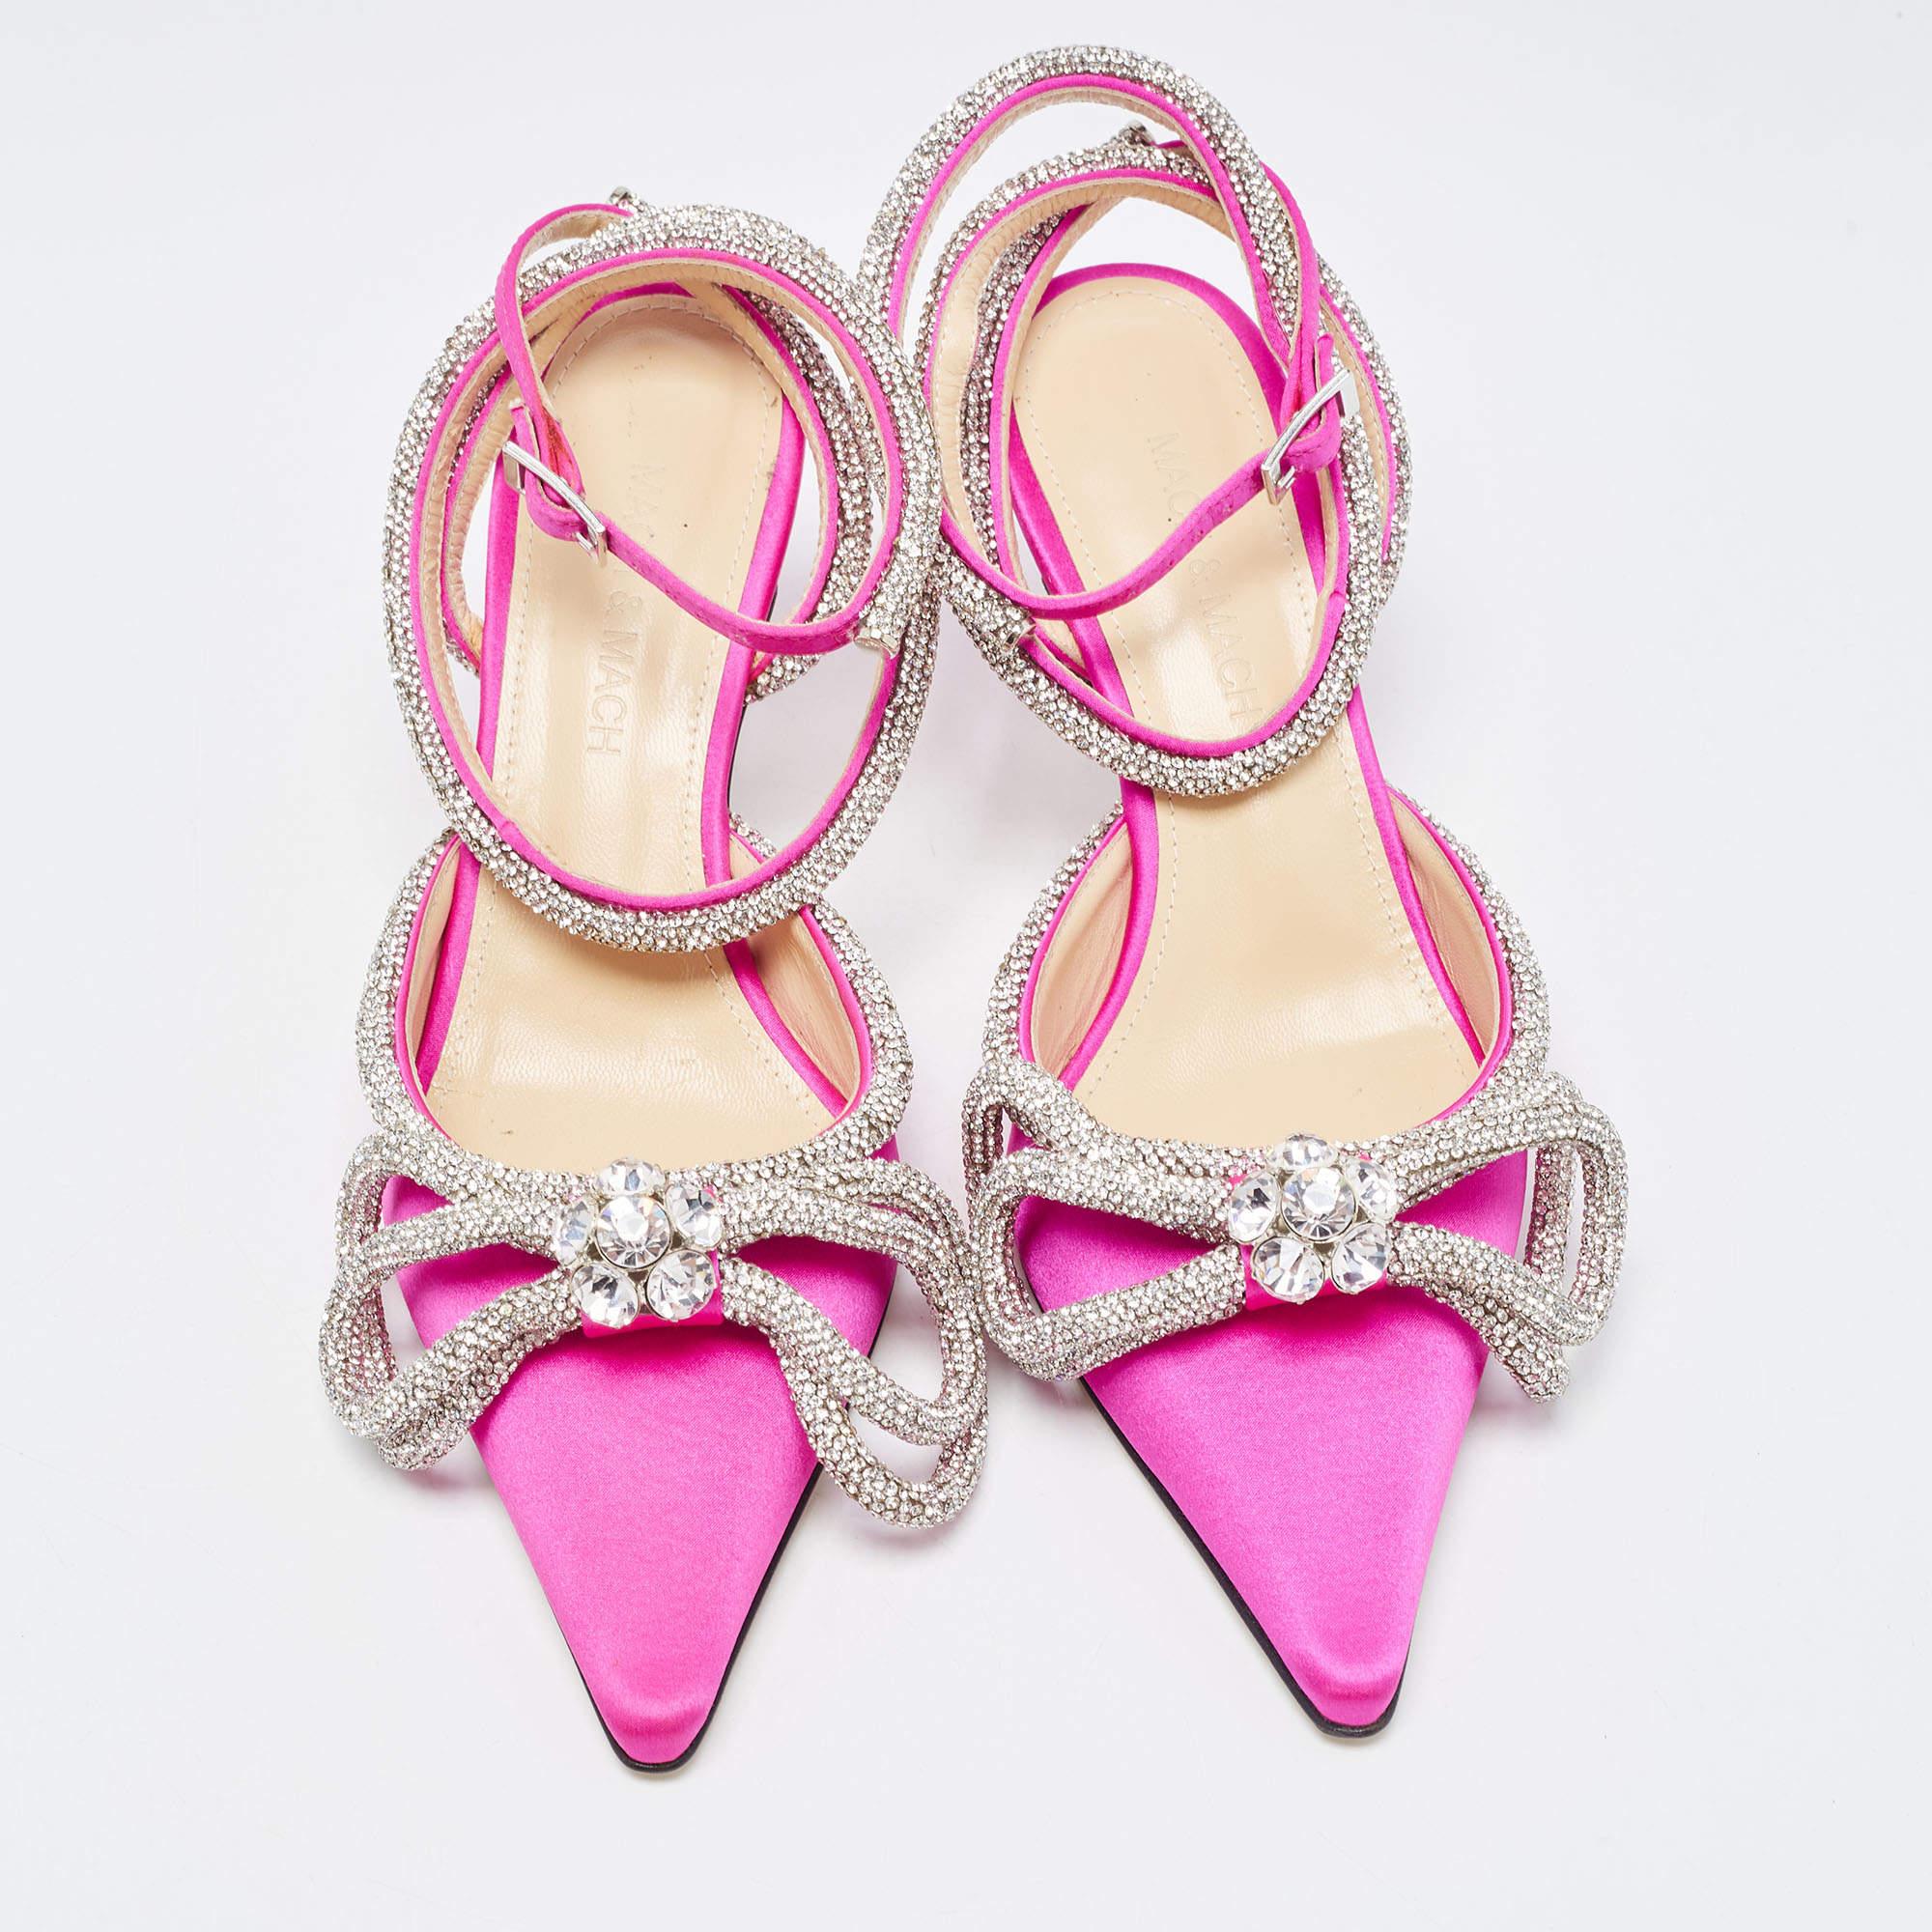 Add these regal Mach & Mach pumps to your closet and be glamorously ready for those special parties and events. Constructed from pink satin, these pointed-toe pumps feature double bow crystal embellishments on the front, along with low heels and